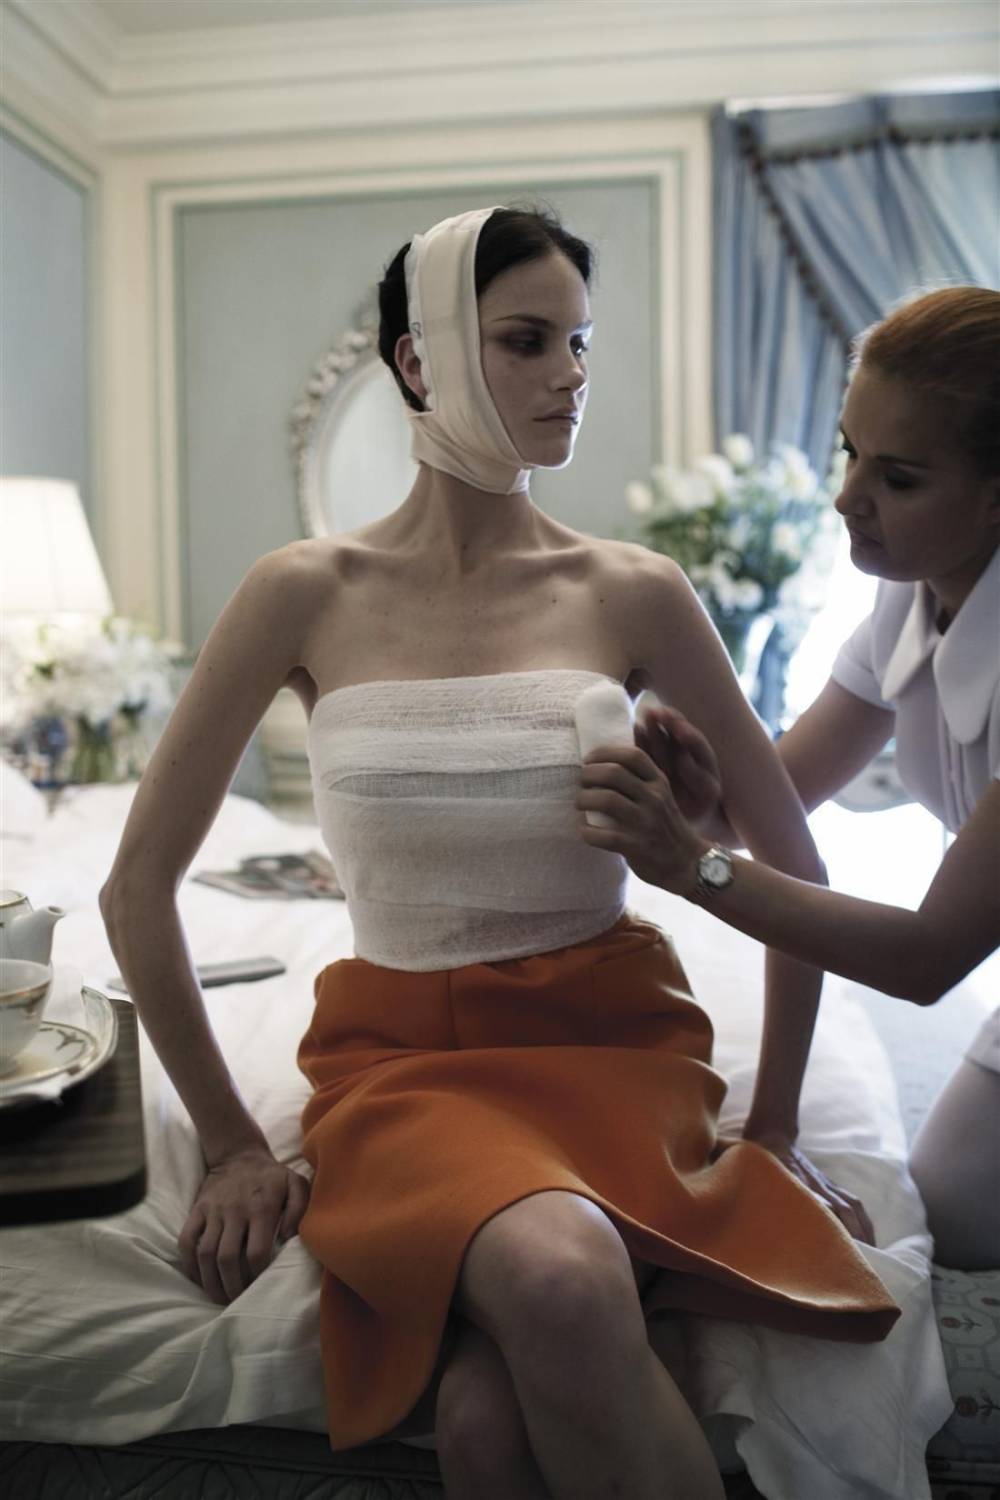  Vogue Italia, Makeover Madness photographed by Steven Meisel, 2005 